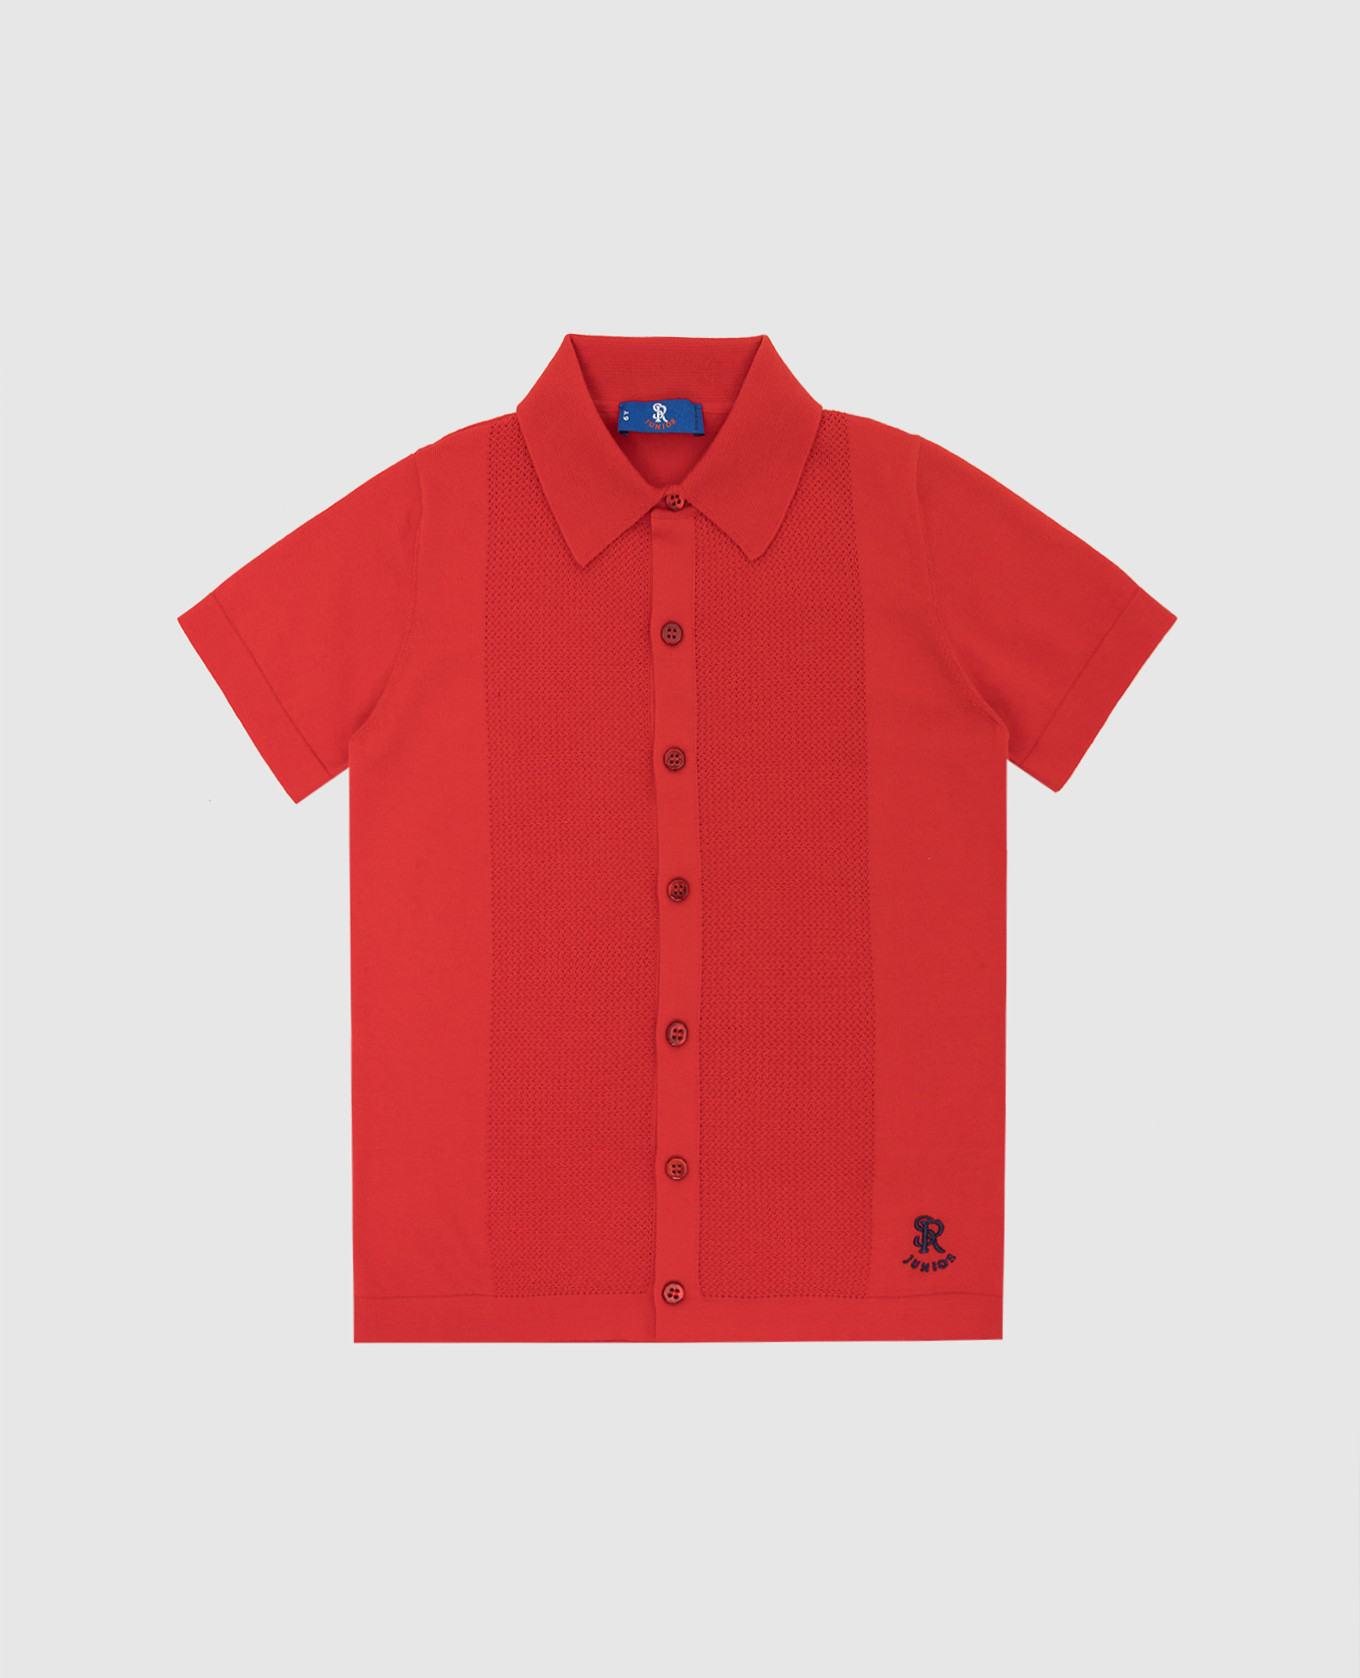 Children's red shirt with a pattern